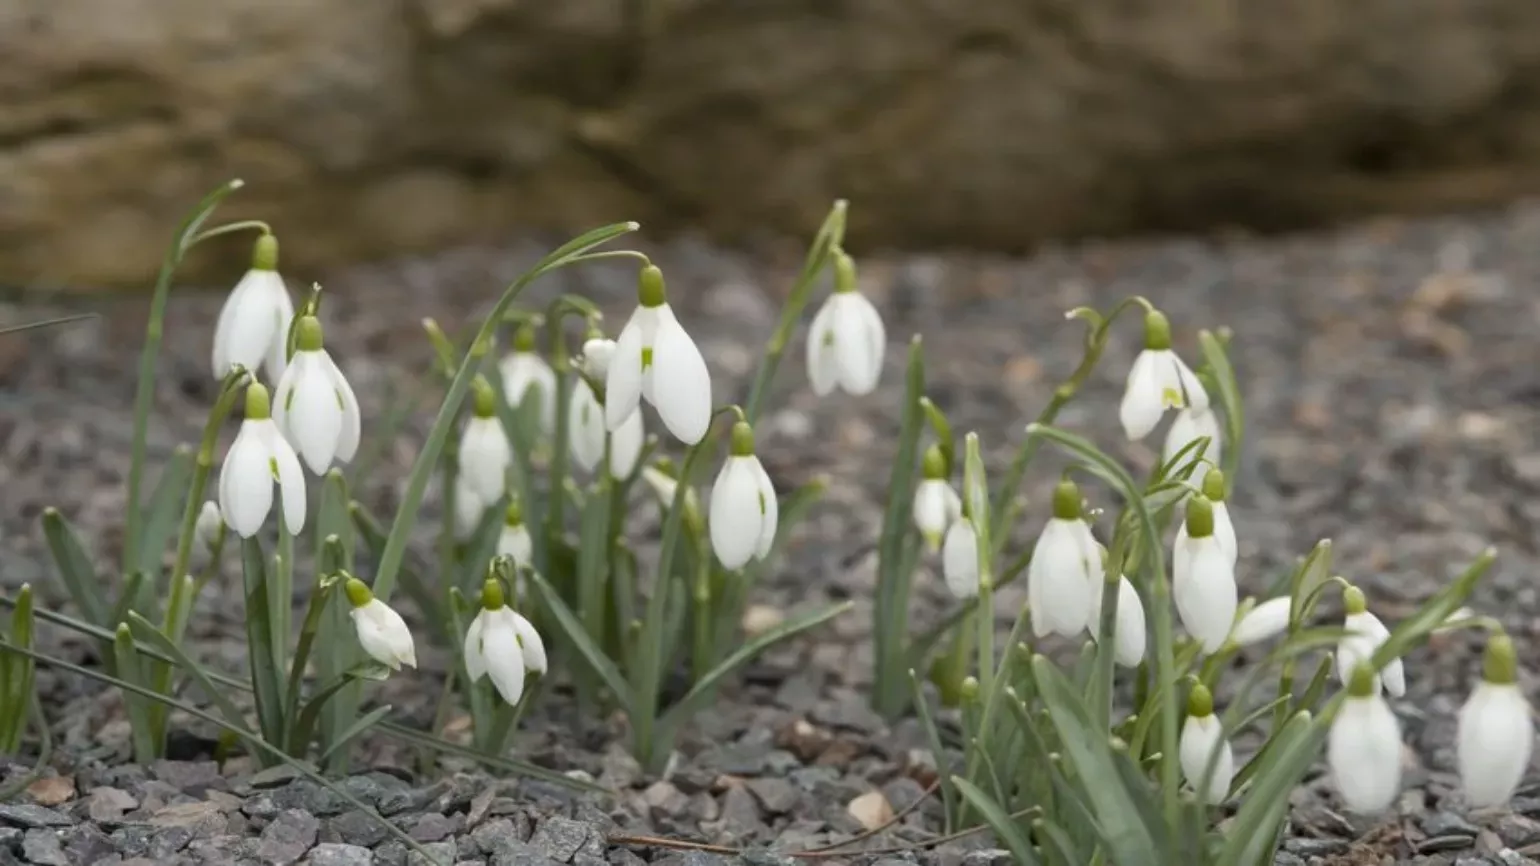 Nodding, white flowers and narrow, greyish-green leaves of the common snowdrop